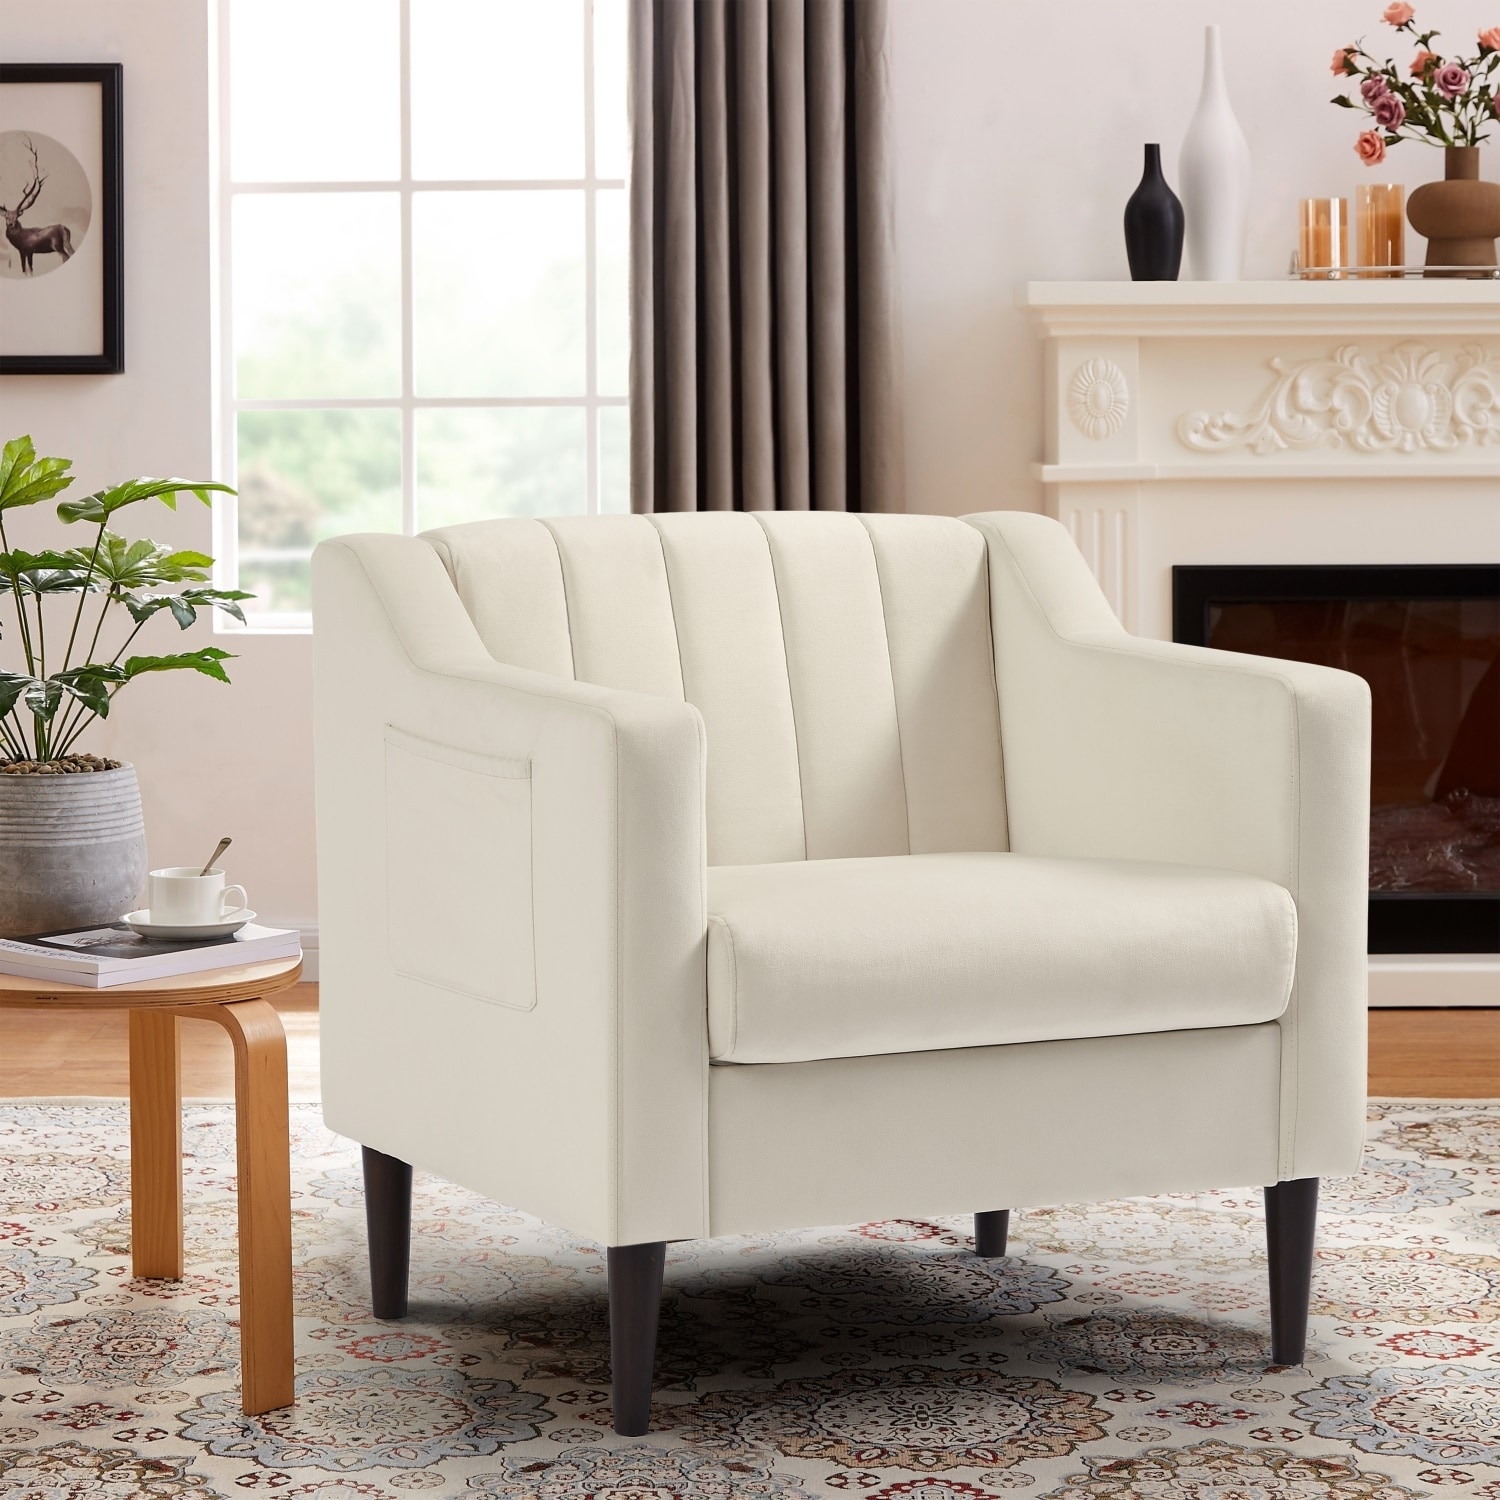 https://ak1.ostkcdn.com/images/products/is/images/direct/bb69d330d0633aabcf35dc710282913c85297603/Modern-Accent-Fabric-Chair-Single-Sofa-Comfy-Upholstered-Arm-Chair-Living-Room-Furniture%2C-Reading-Armchair-for-Bedroom-Sunroom.jpg